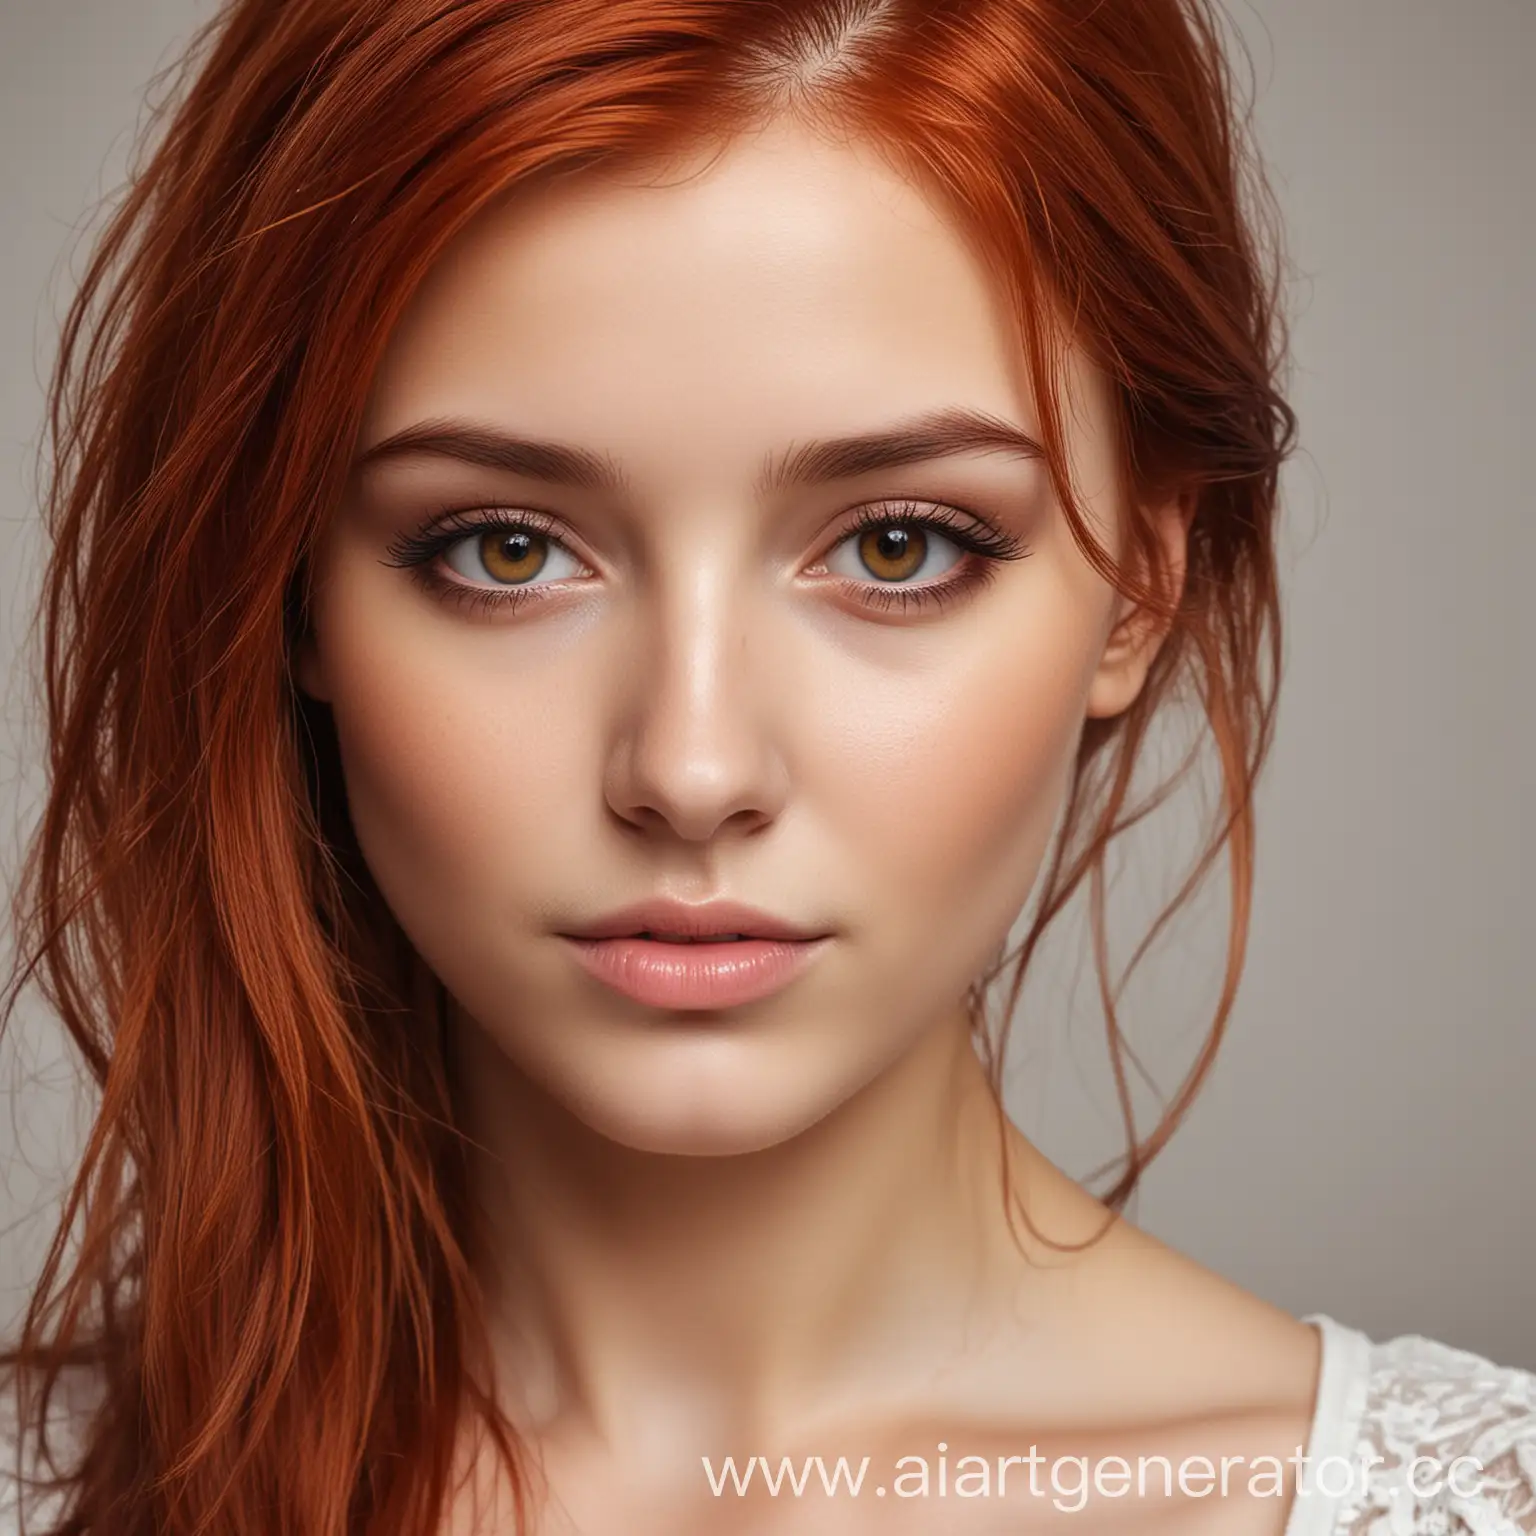 RedHaired-Girl-in-Care-Style-with-Big-Brown-Eyes